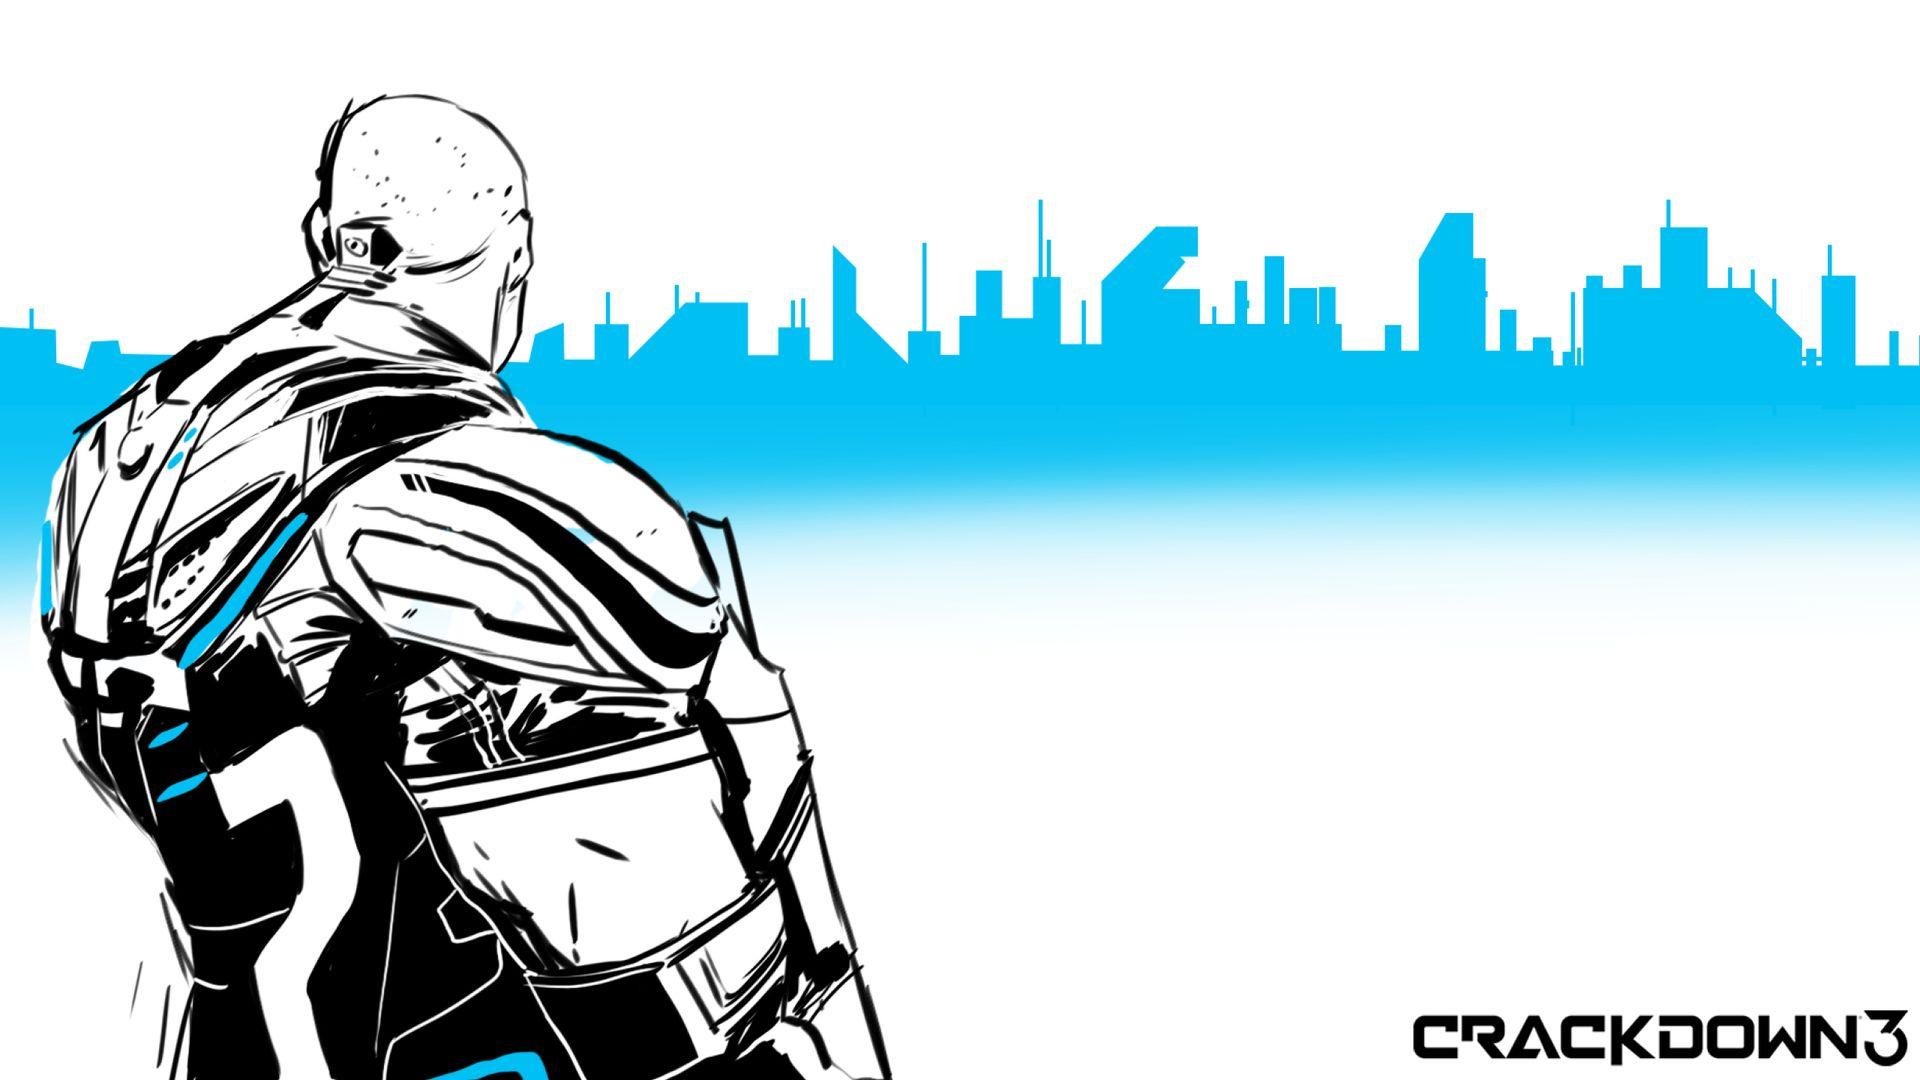 Leader looking over the city. Wallpaper from Crackdown 3